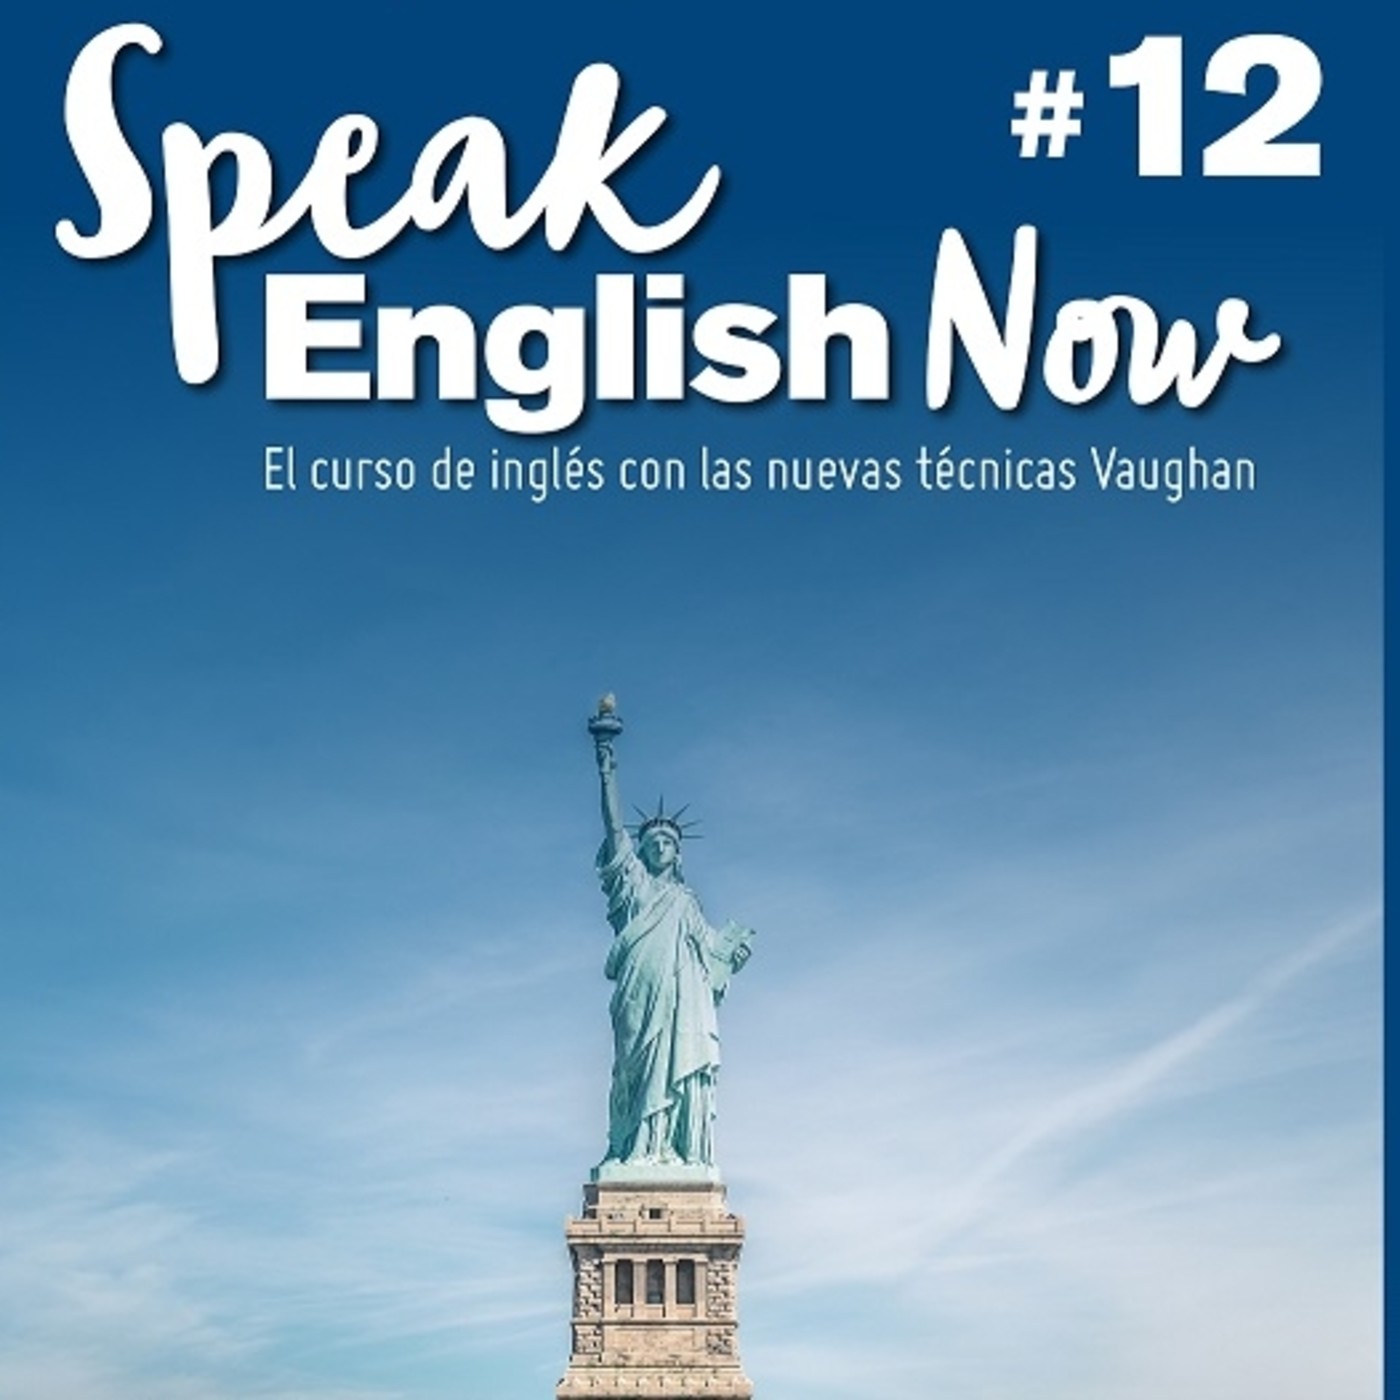 Speak English Now By Vaughan Libro 12